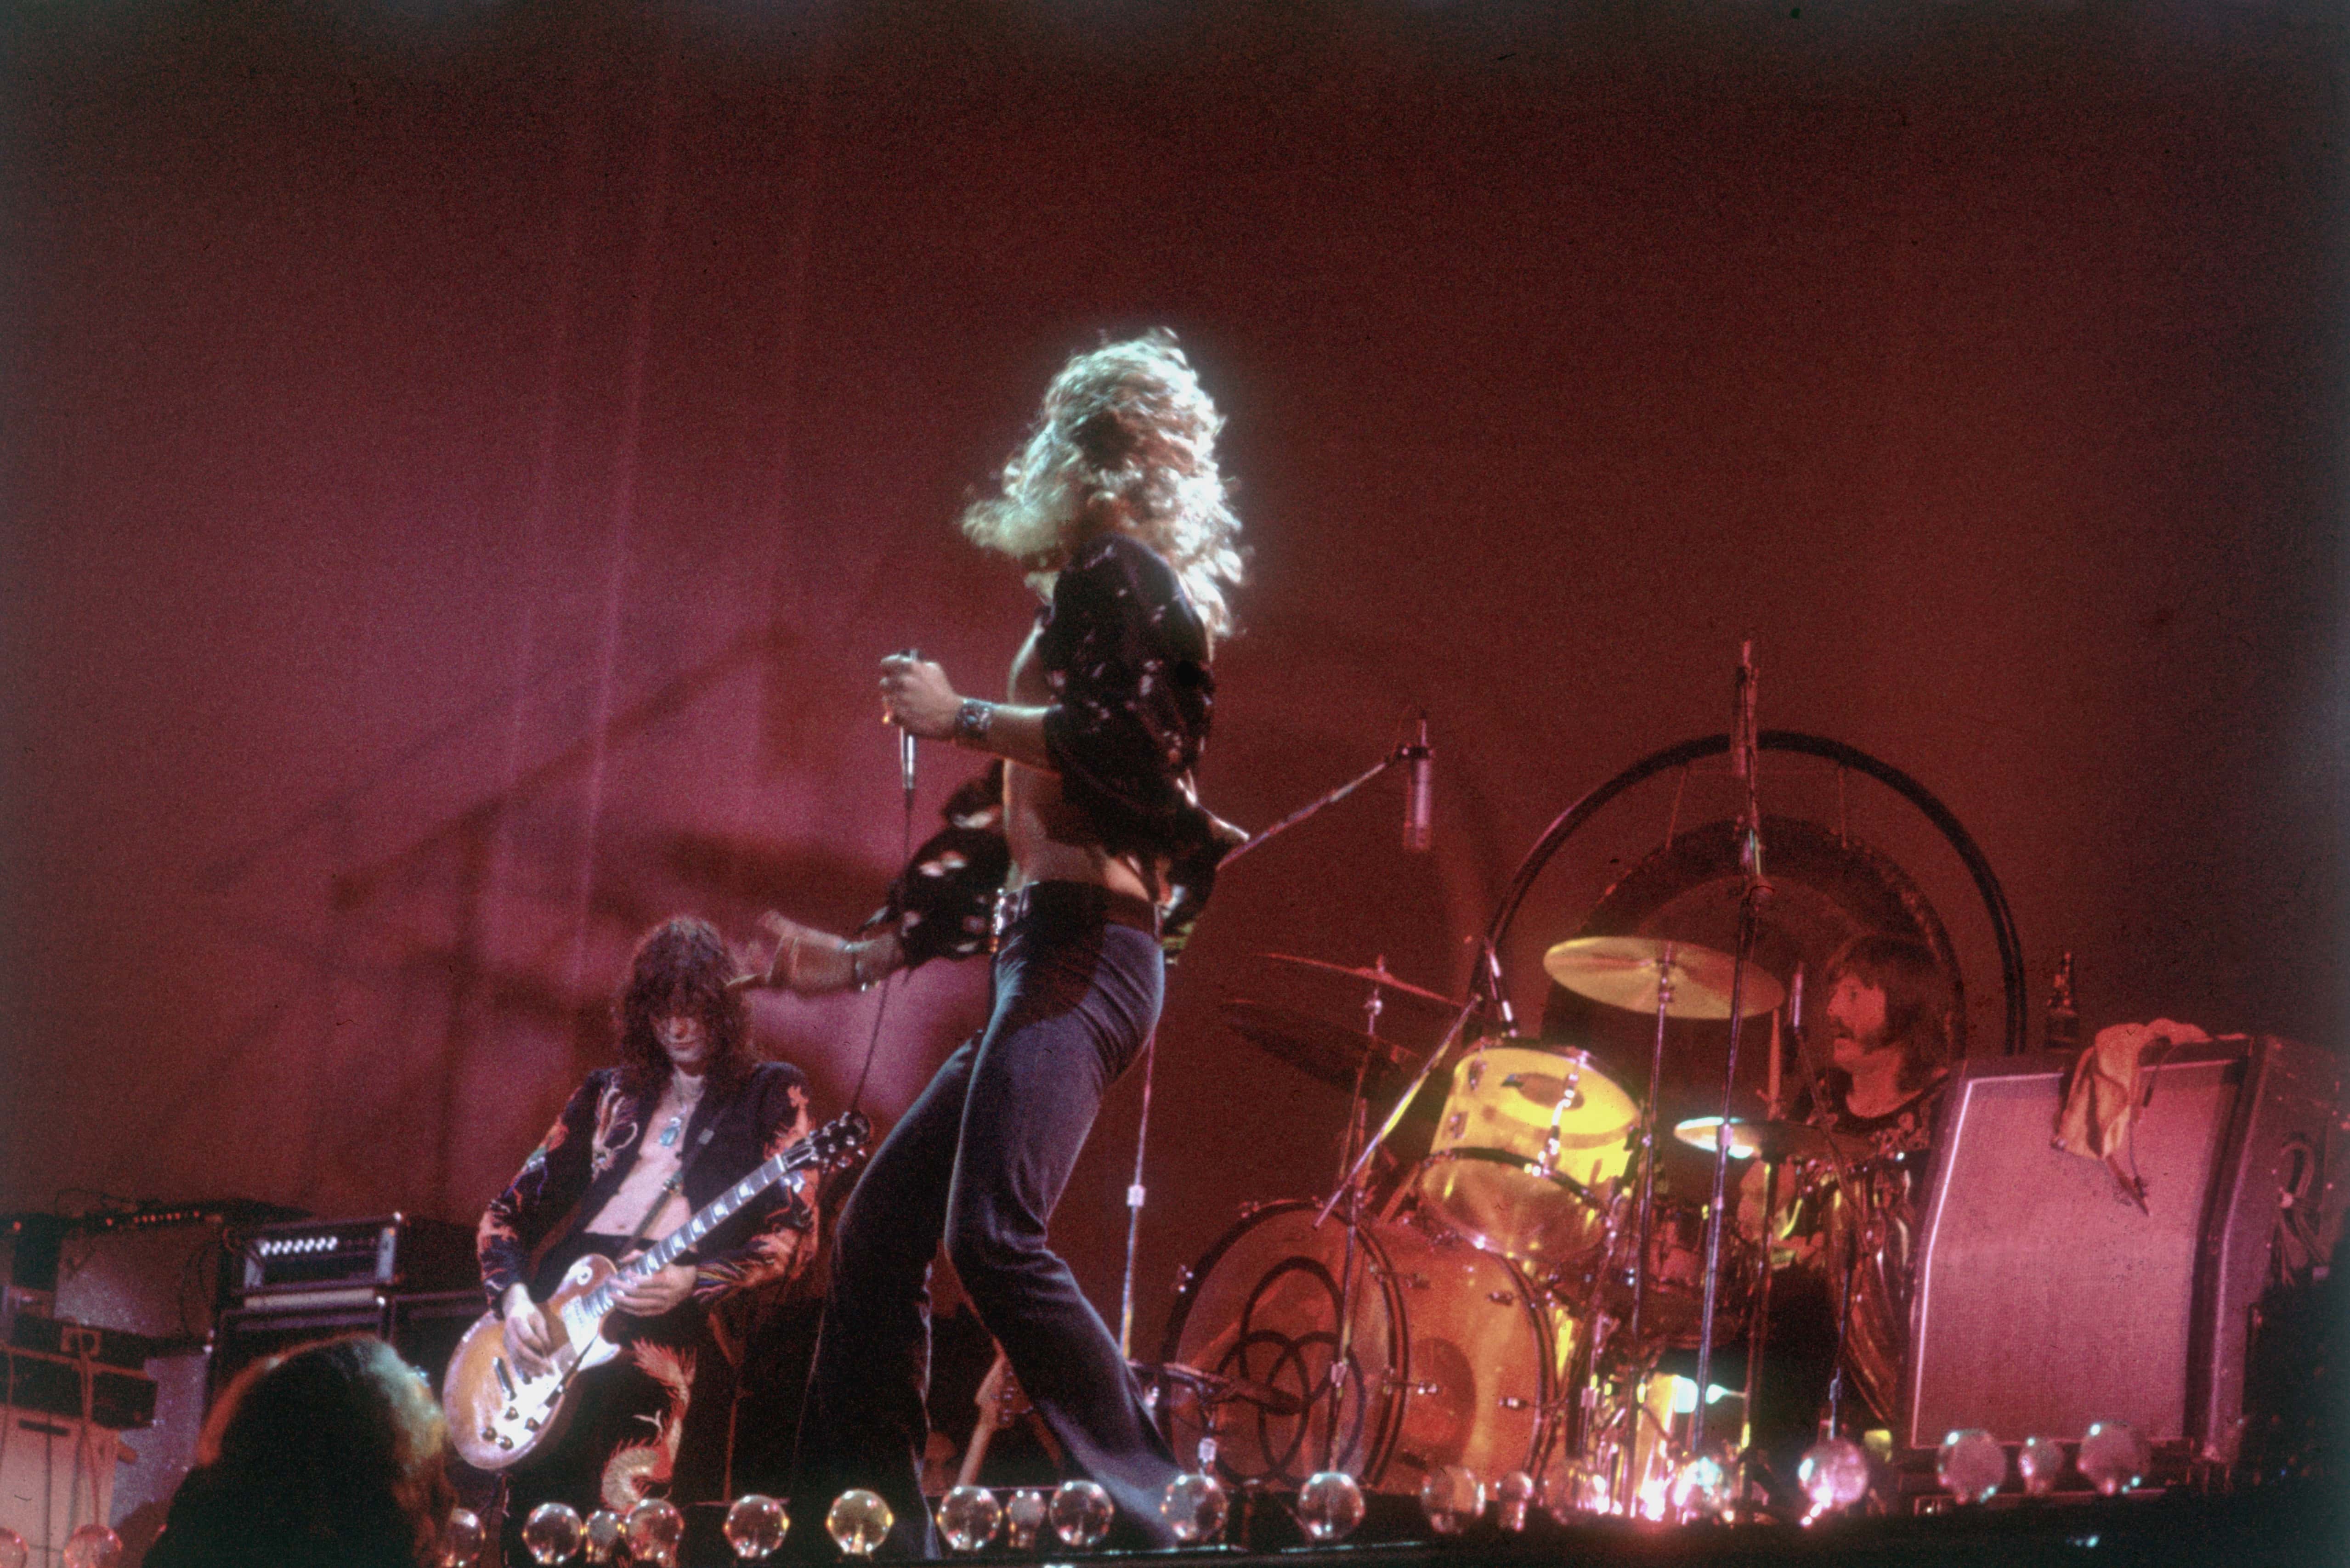 Led Zep Performing on stage.